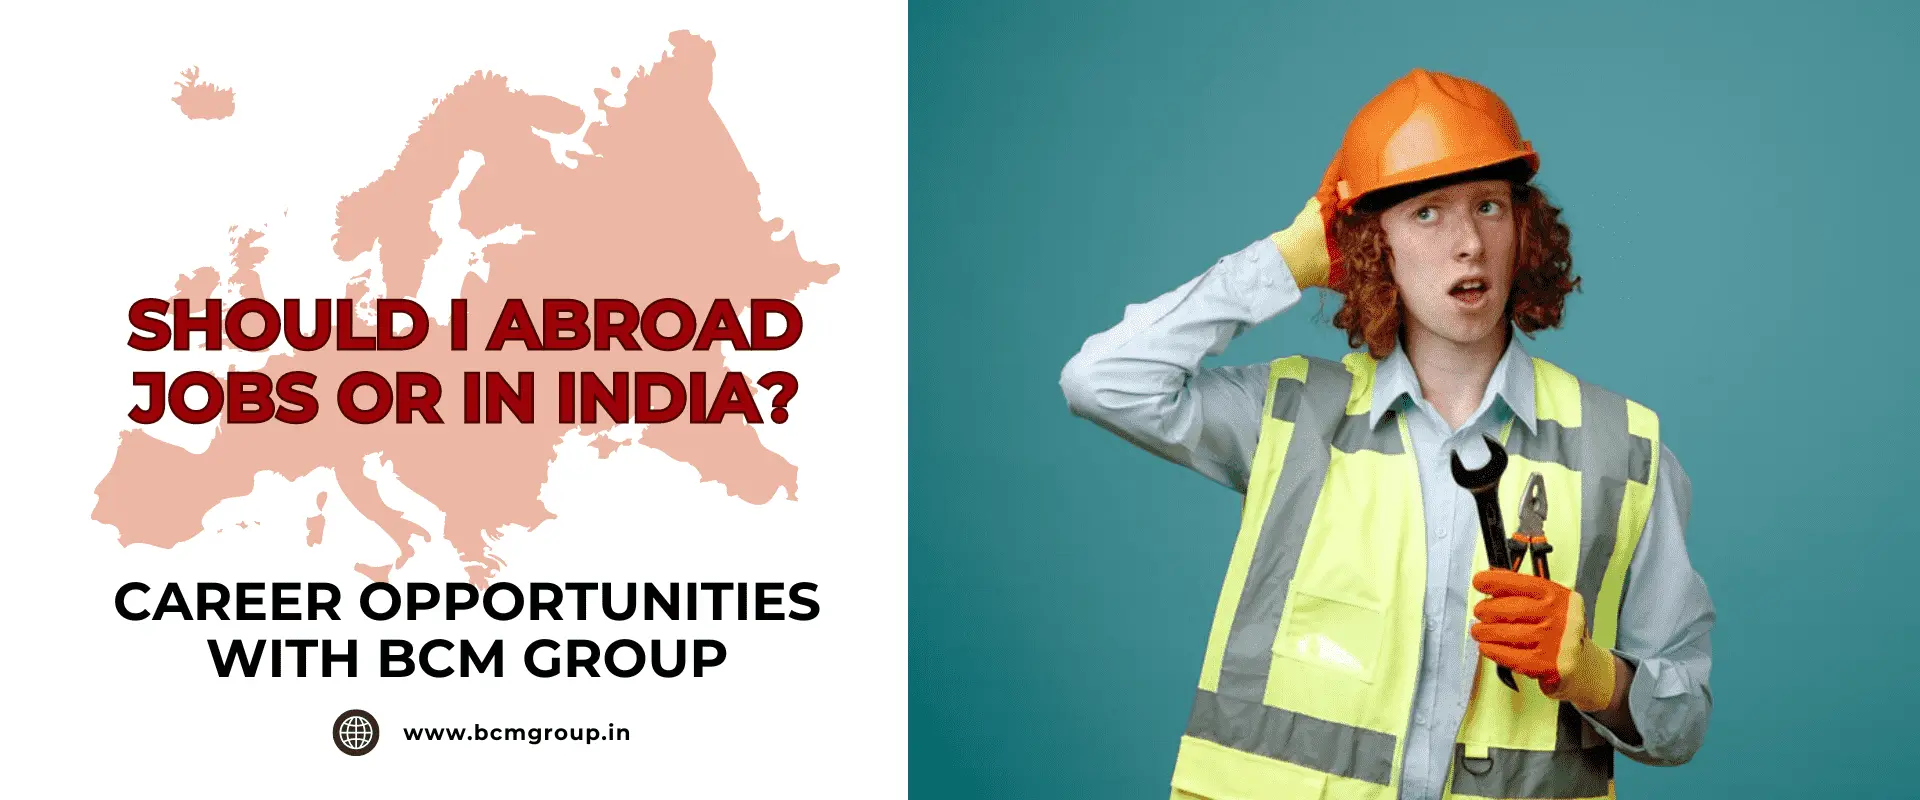 SHOULD I ABROAD JOBS OR IN INDIA?